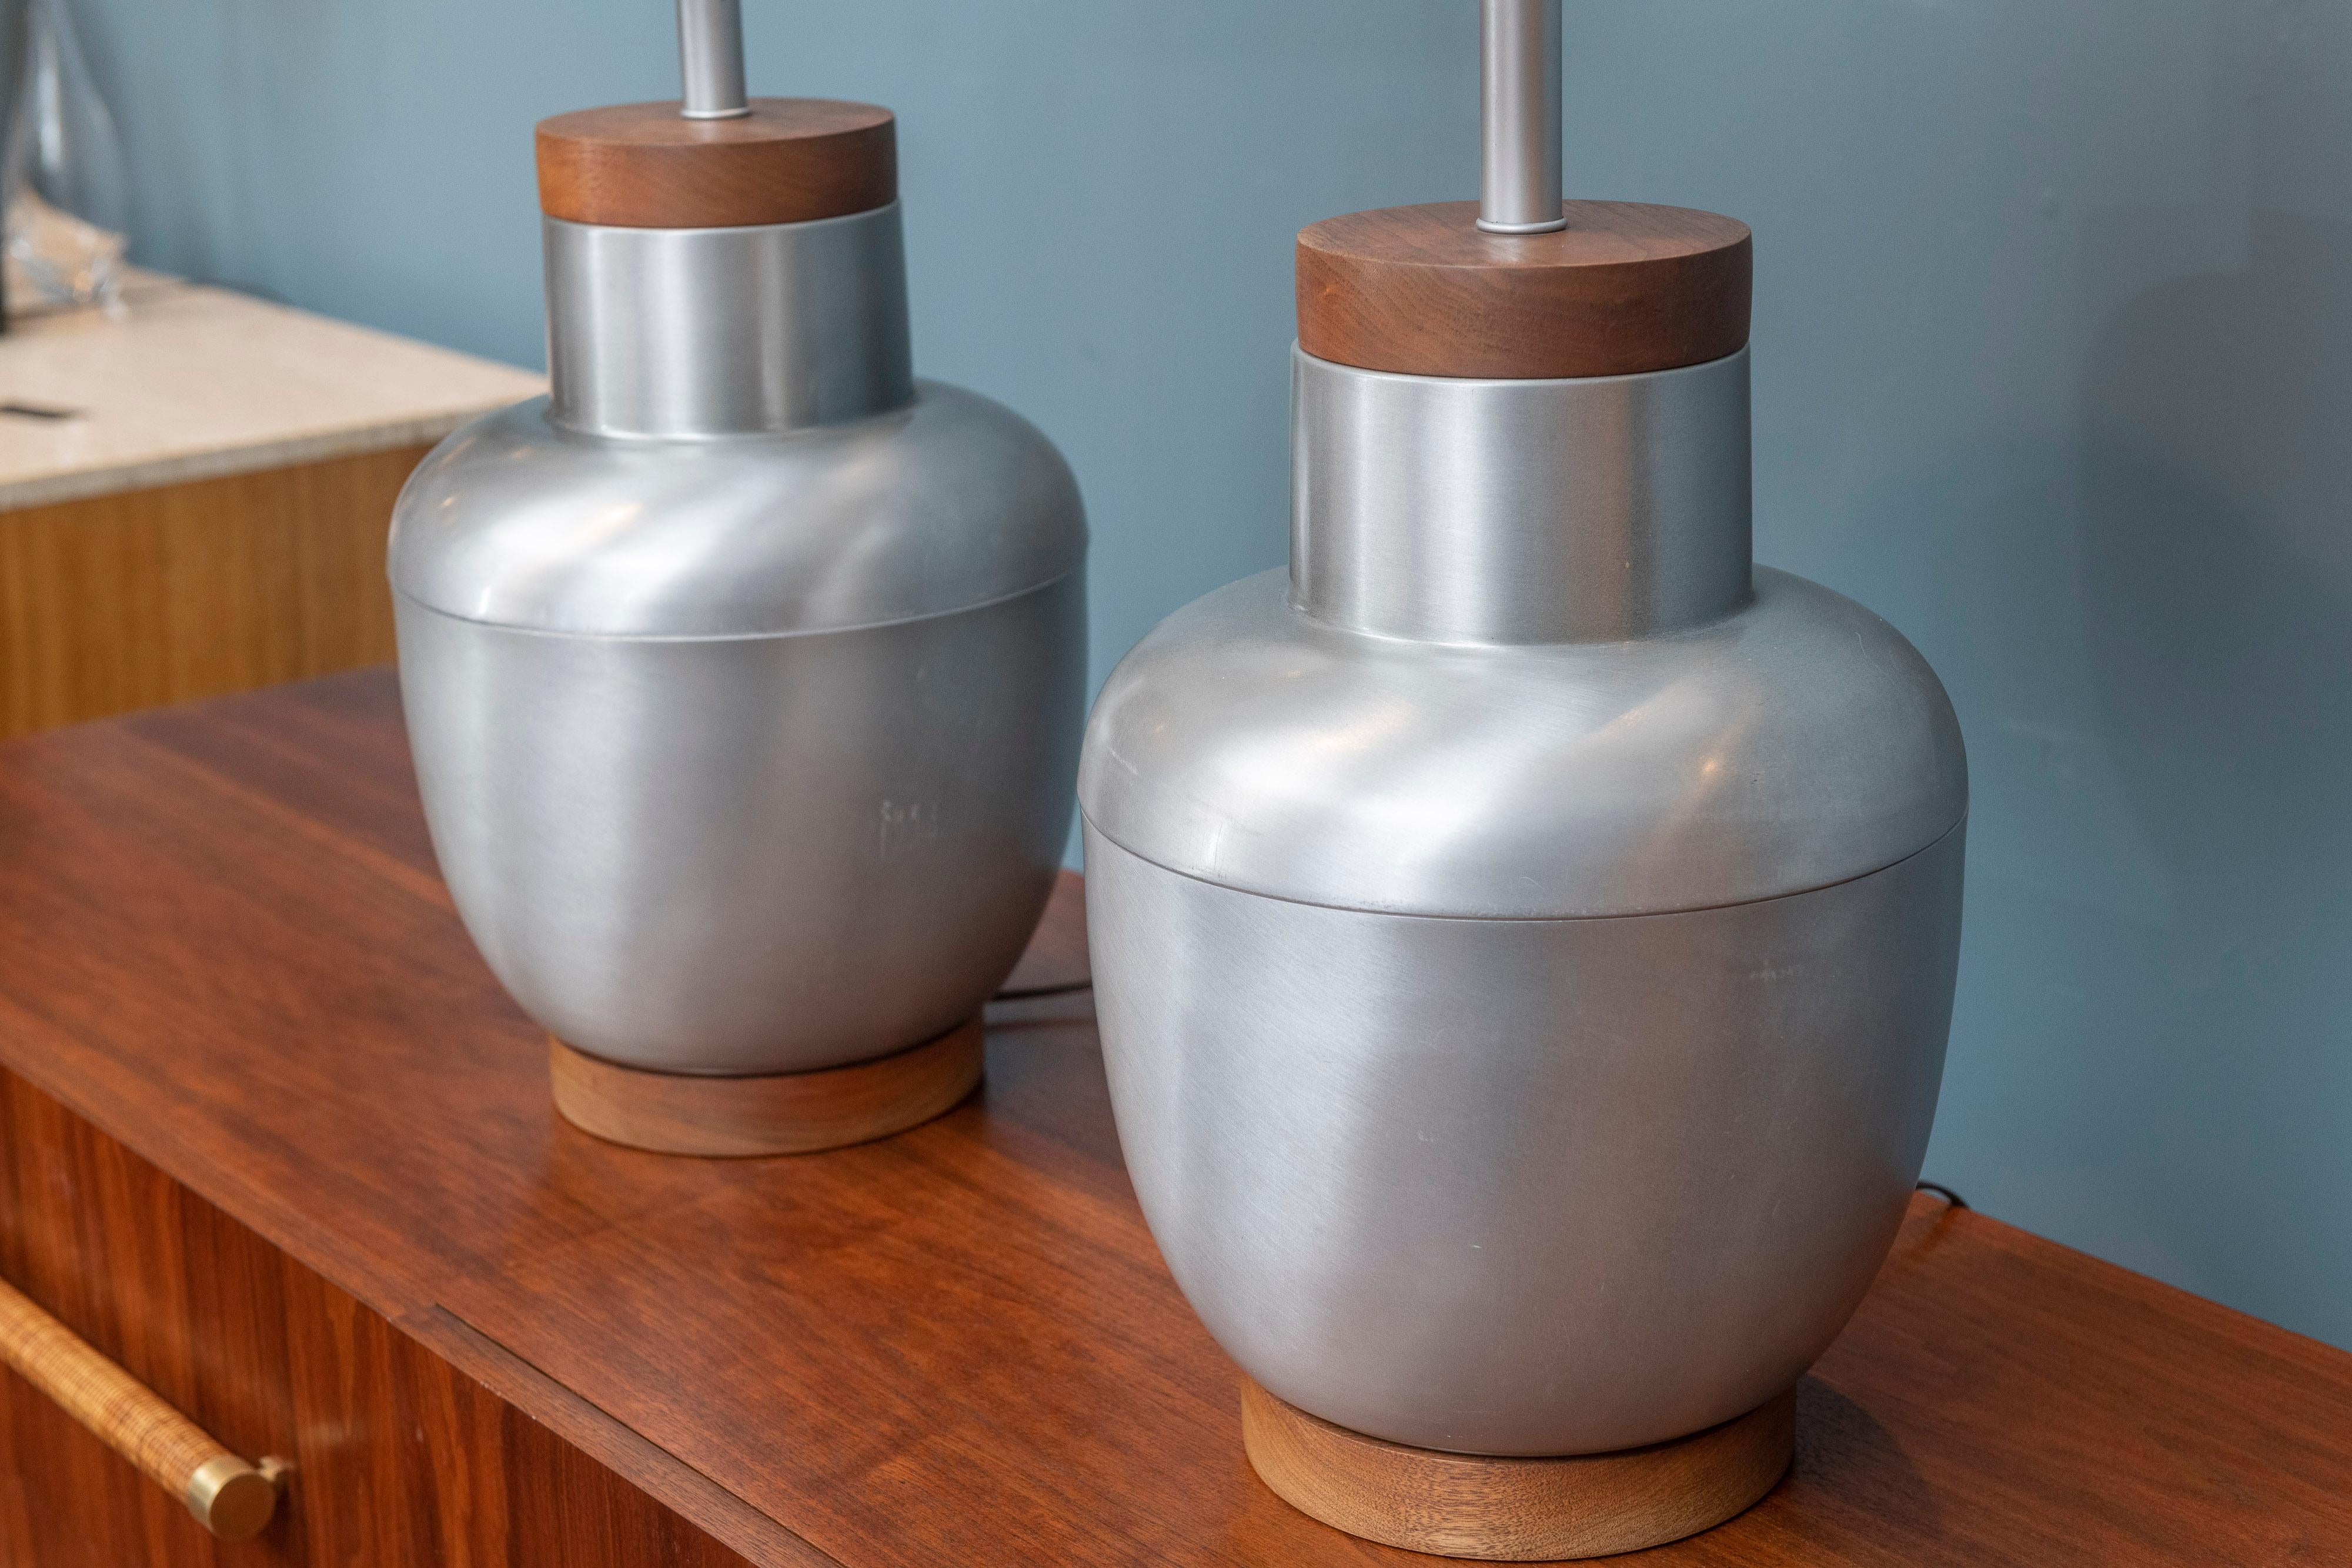 Mid-Century Modern spun aluminum decorative table lamps with walnut bases and tops just newly rewired and ready to install. The lamps are American made of high quality by an unknown manufacturer and show minimal signs of age and use including scuffs